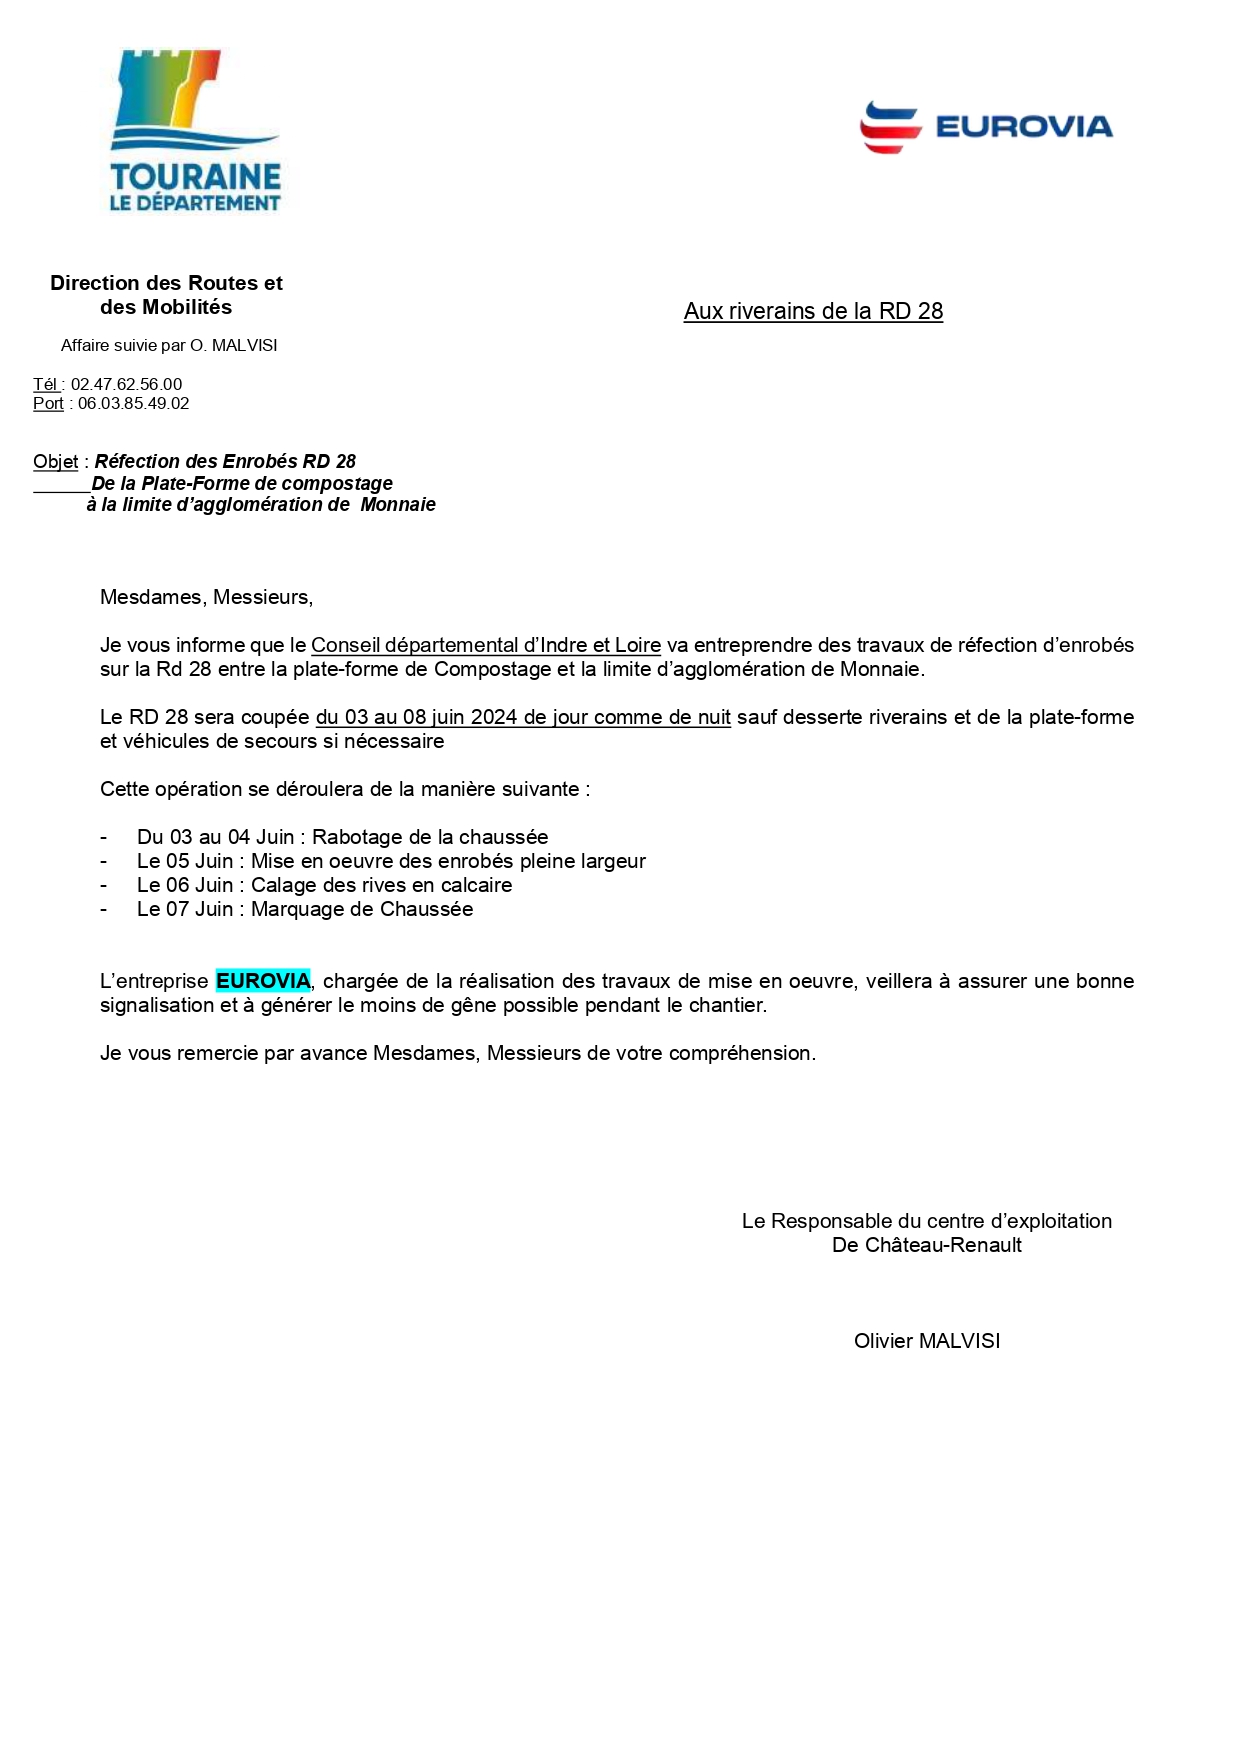 courrier info riverains rd 28 page 0001